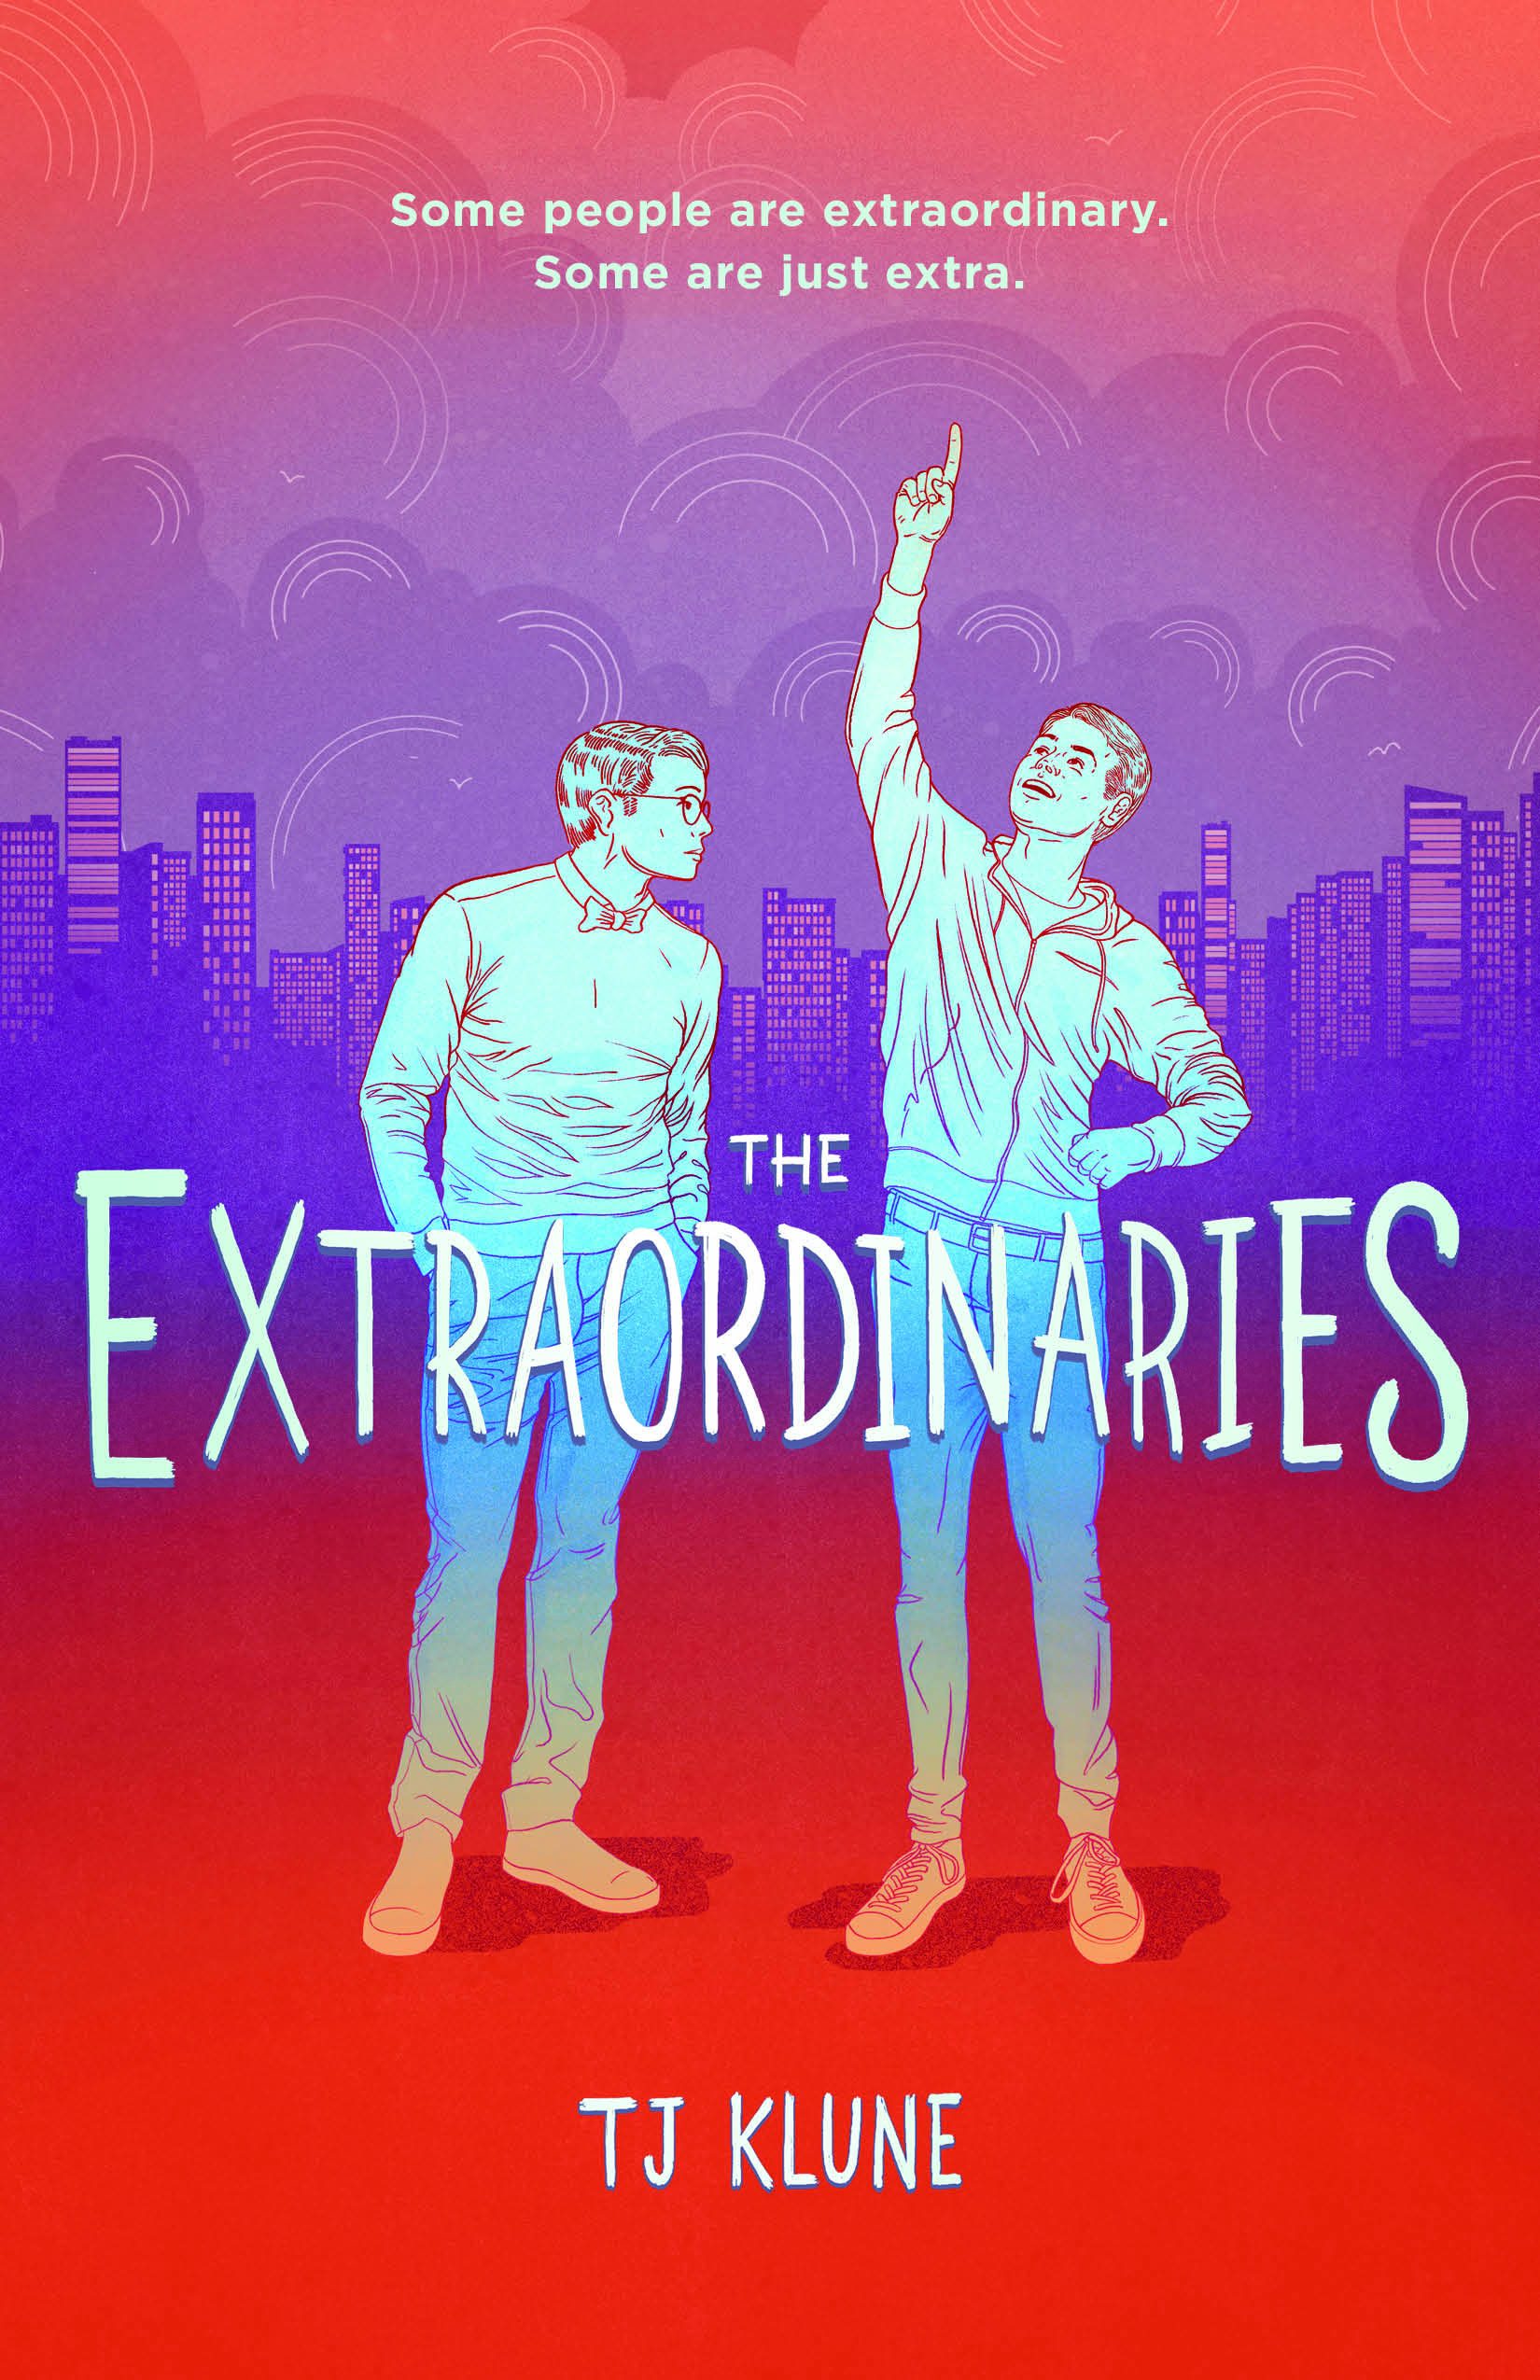 The Extraordinaries - Novel By T.J. Klune Release Date? 2020 YA LGBT Fantasy & Romance Releases